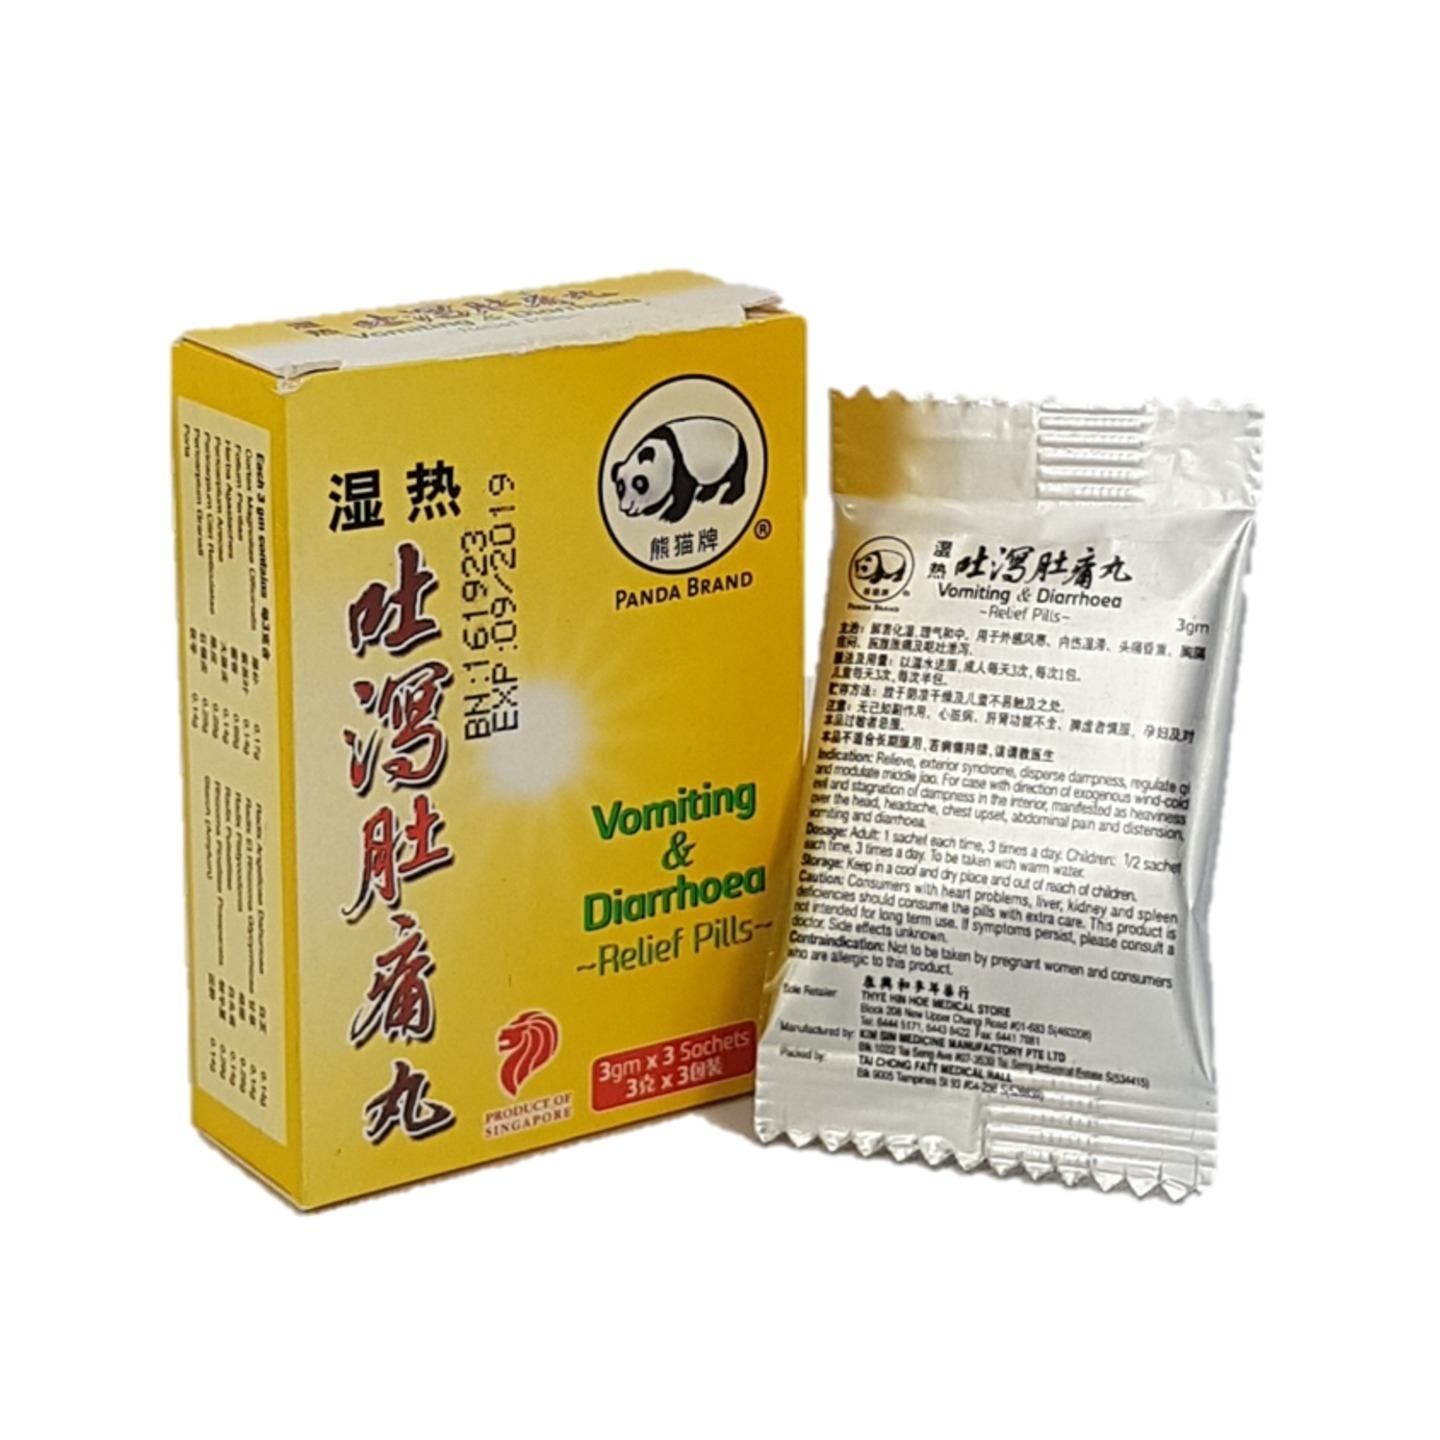 Vomiting & Diarrhoea Relief Pills湿热吐泻肚痛丸 PROMOTION FOR 12